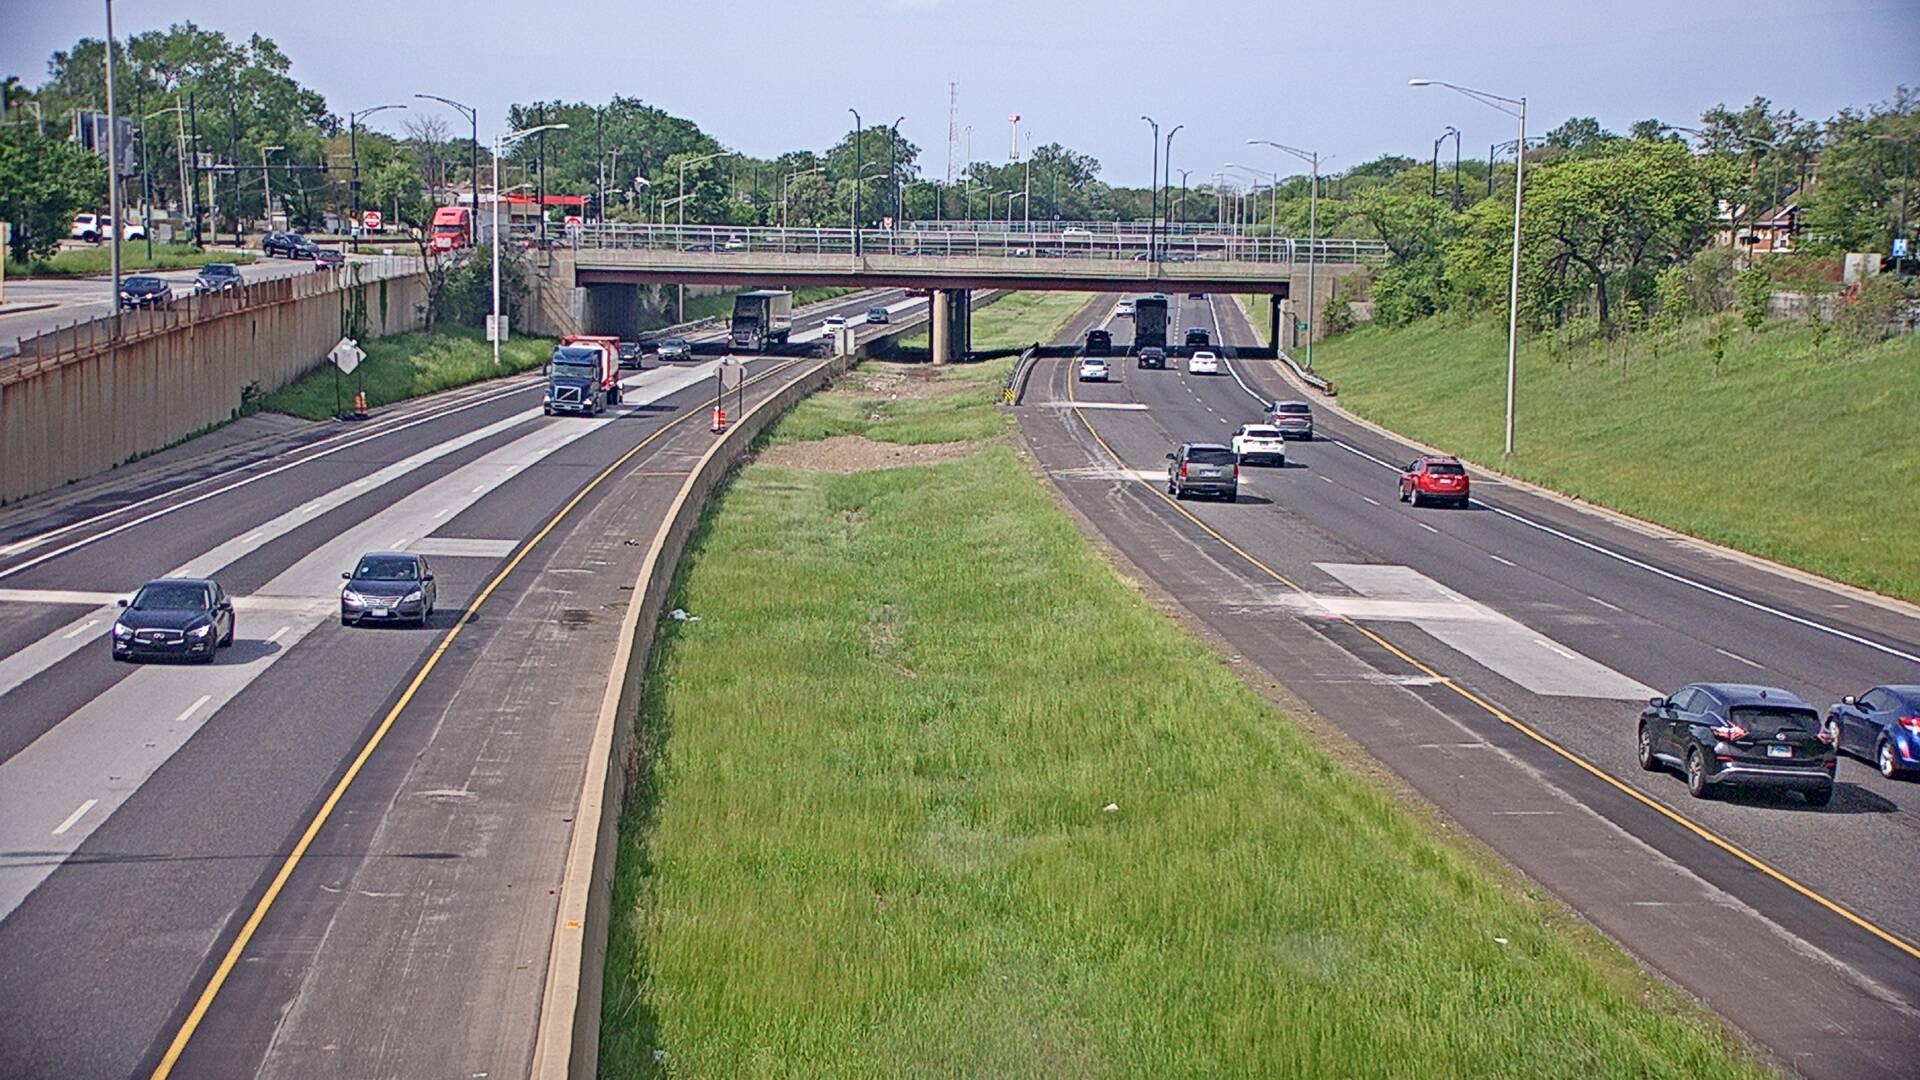 I-57 at 114th St 1 - Chicago and Illinois